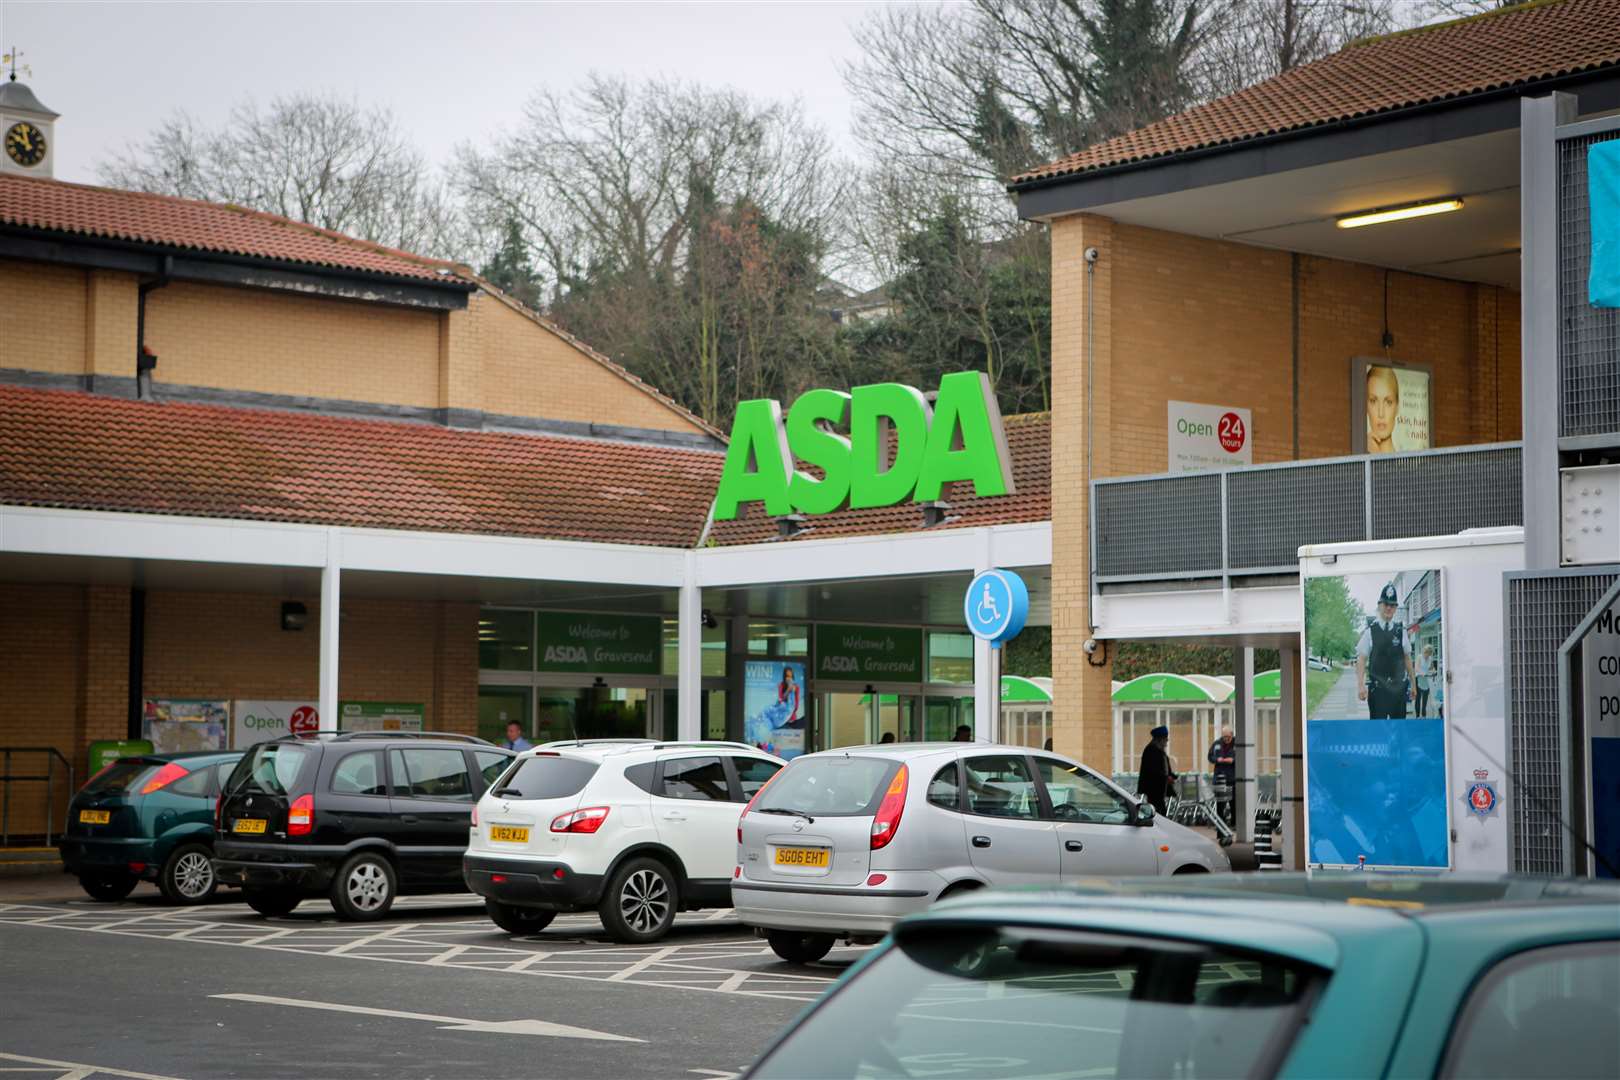 The incident happened at Asda in Gravesend